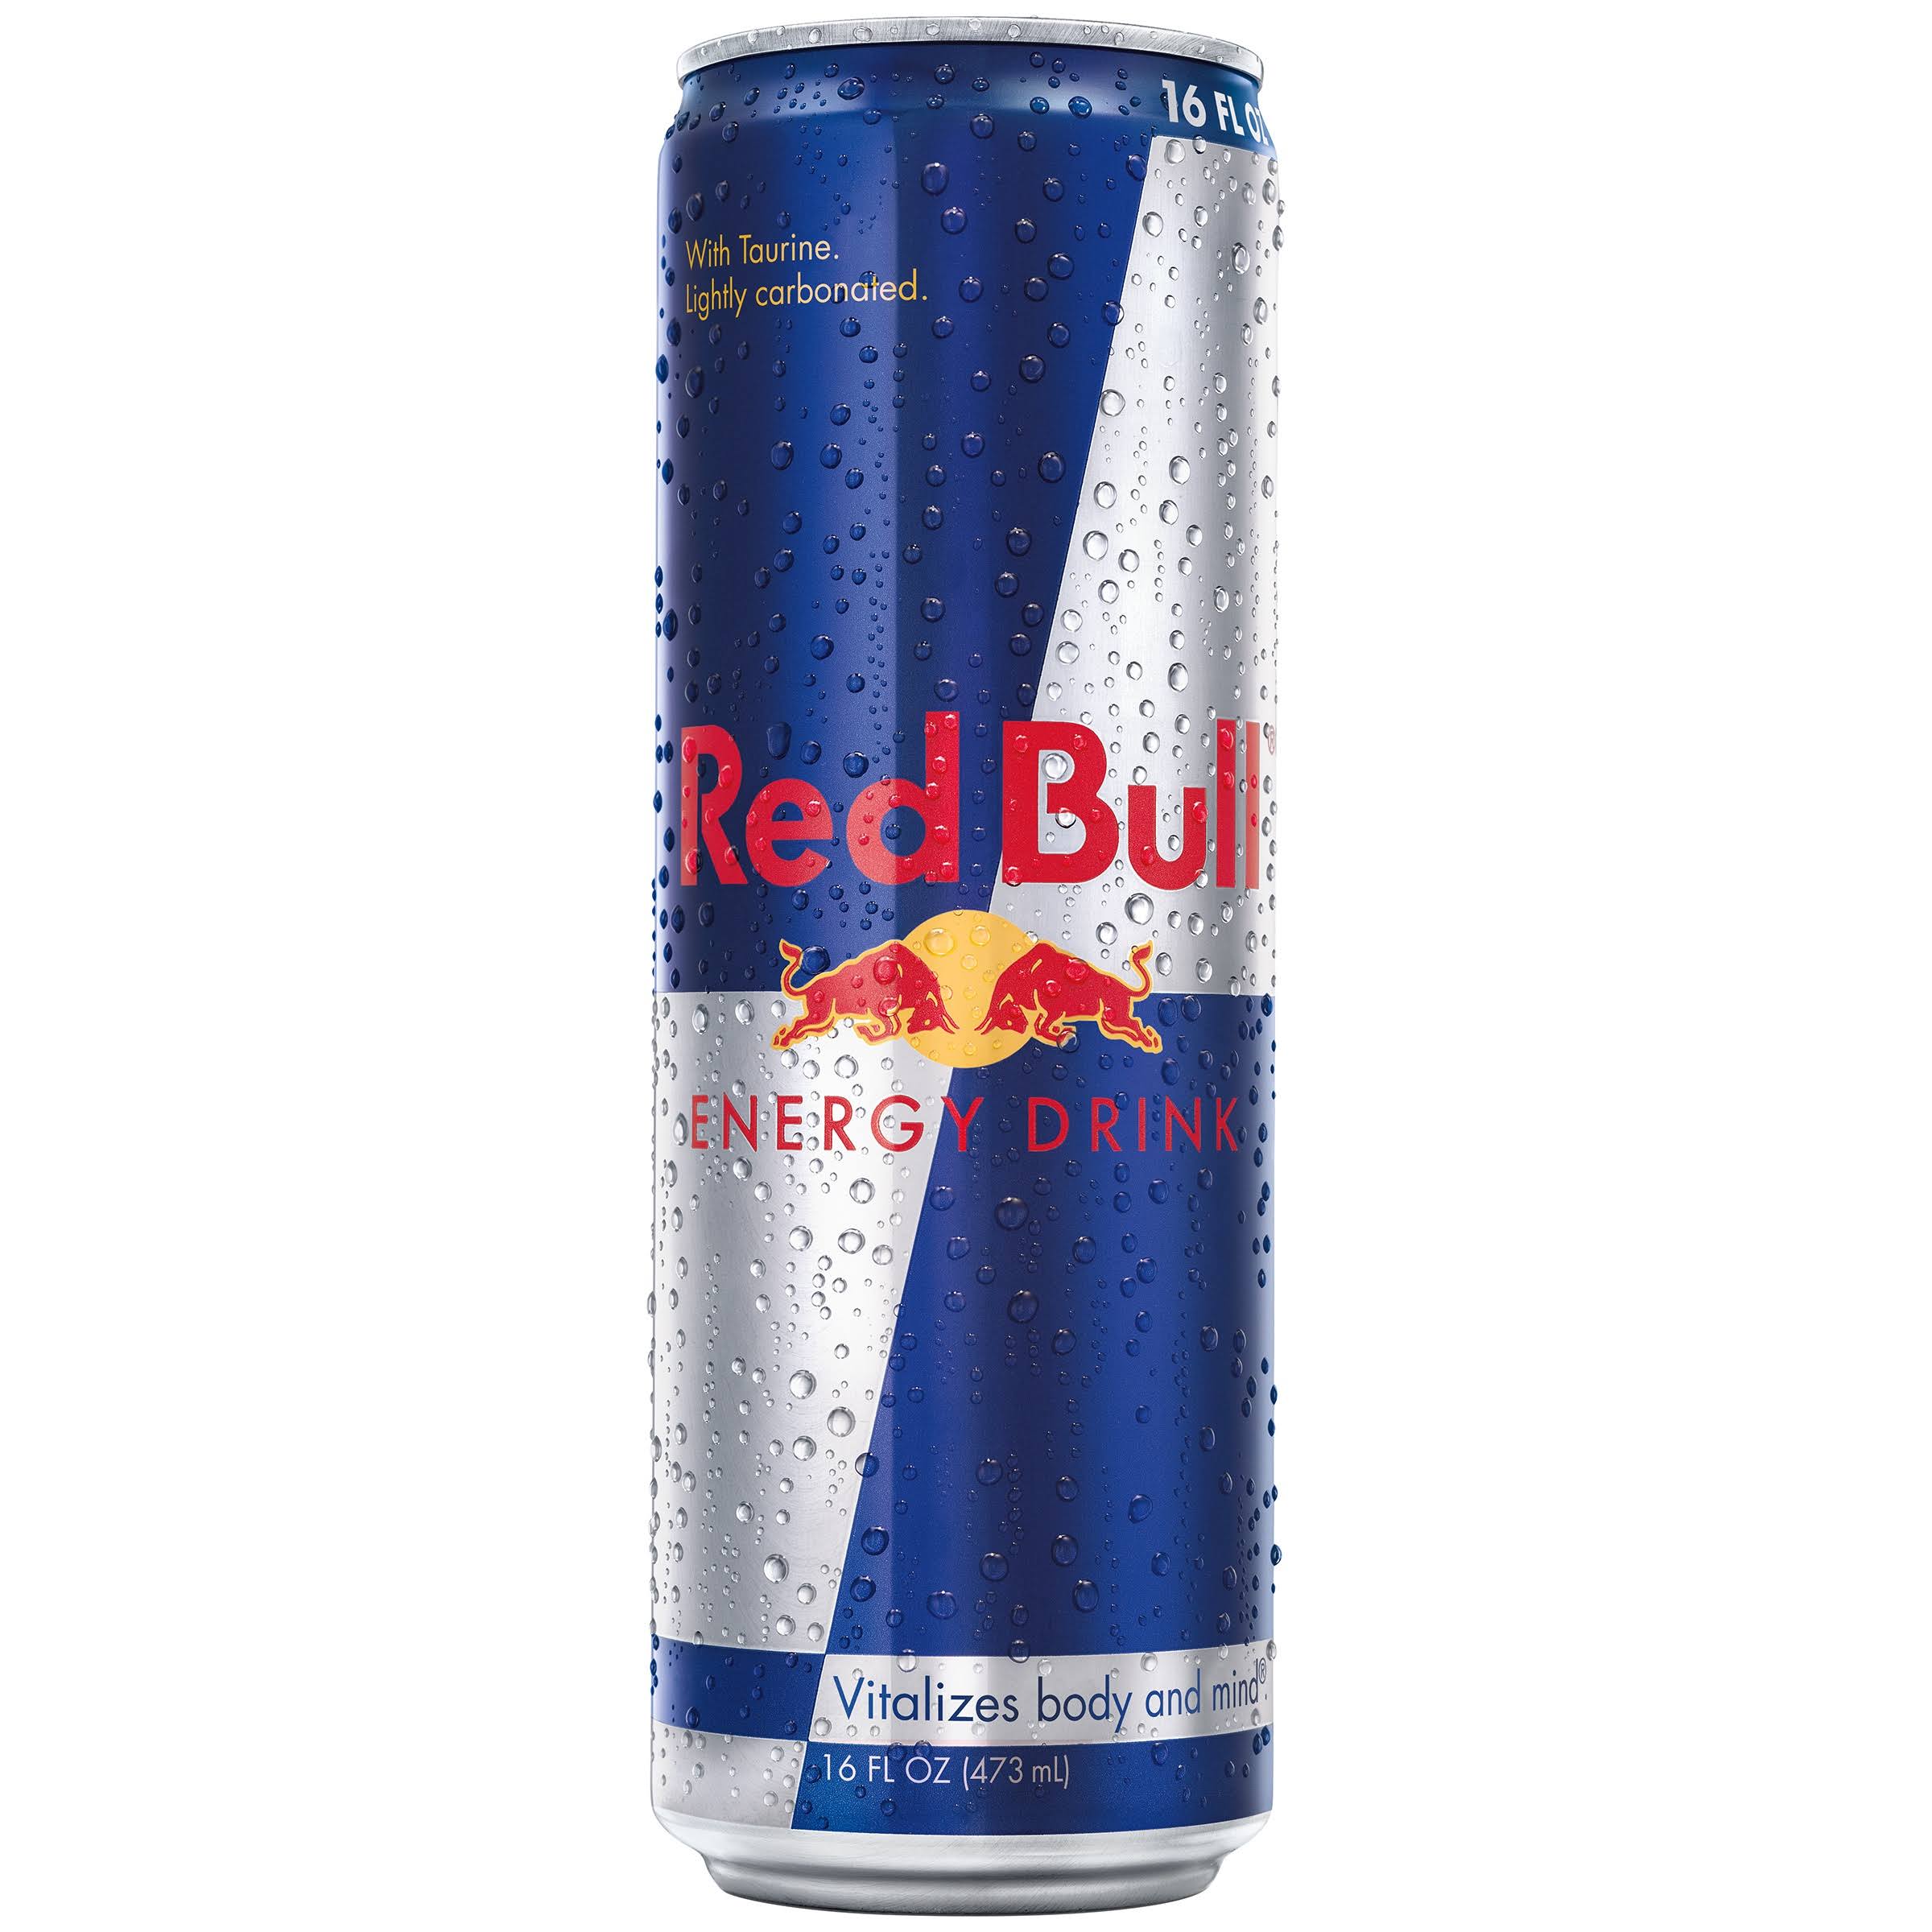 Red Bull Energy Drink - 16 fl oz can